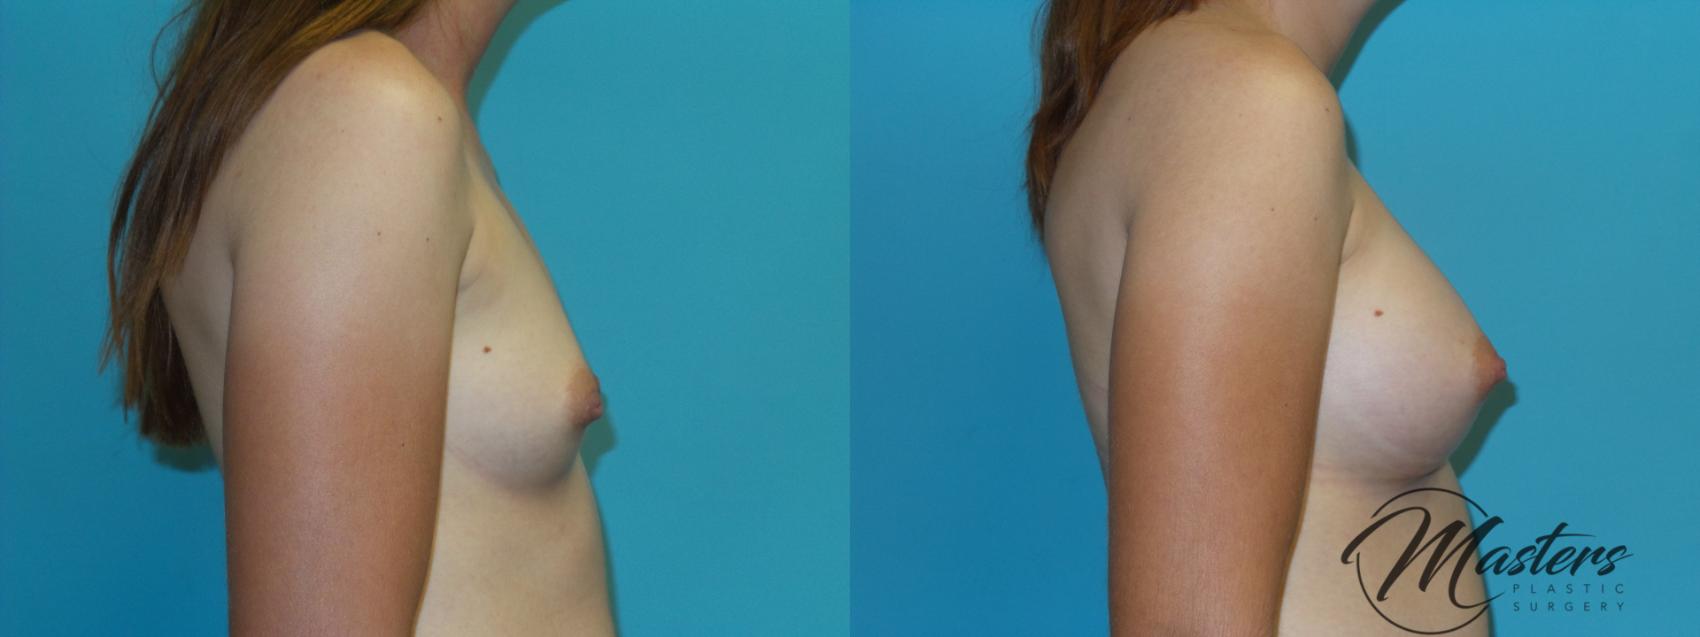 Before & After Breast Augmentation Case 3 Right Side View in Oklahoma City, Tulsa, Norman, OK